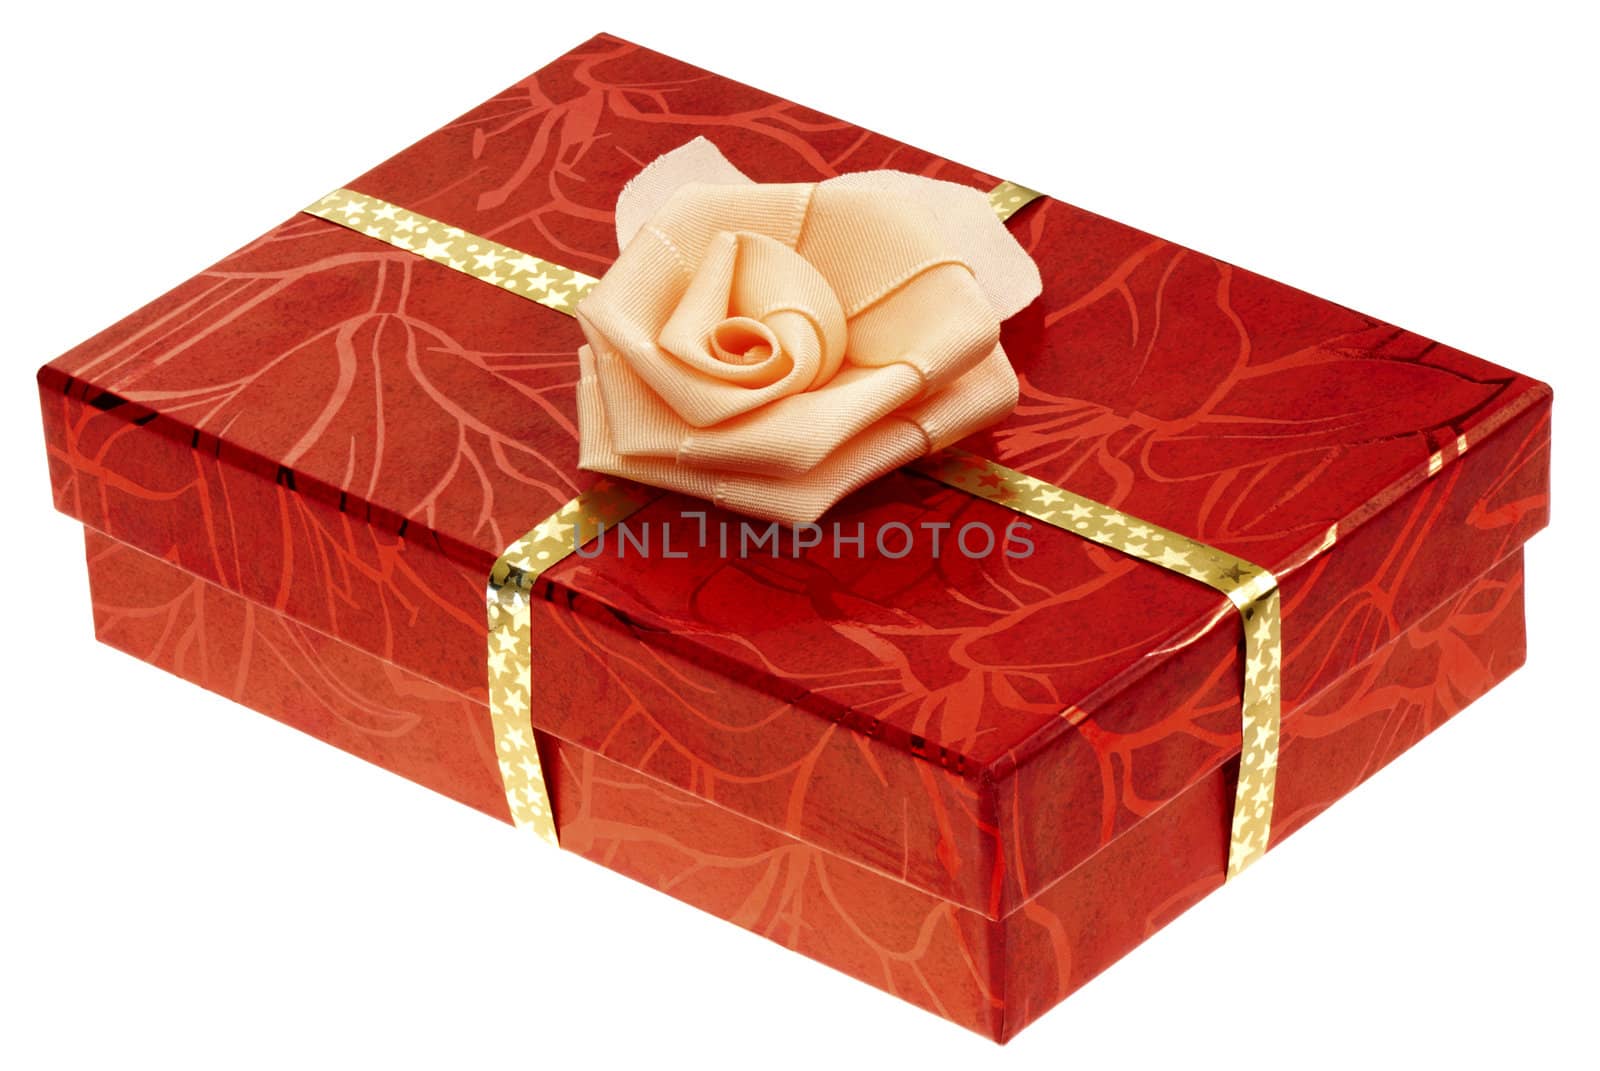 A red boxed gift with rose ribbon